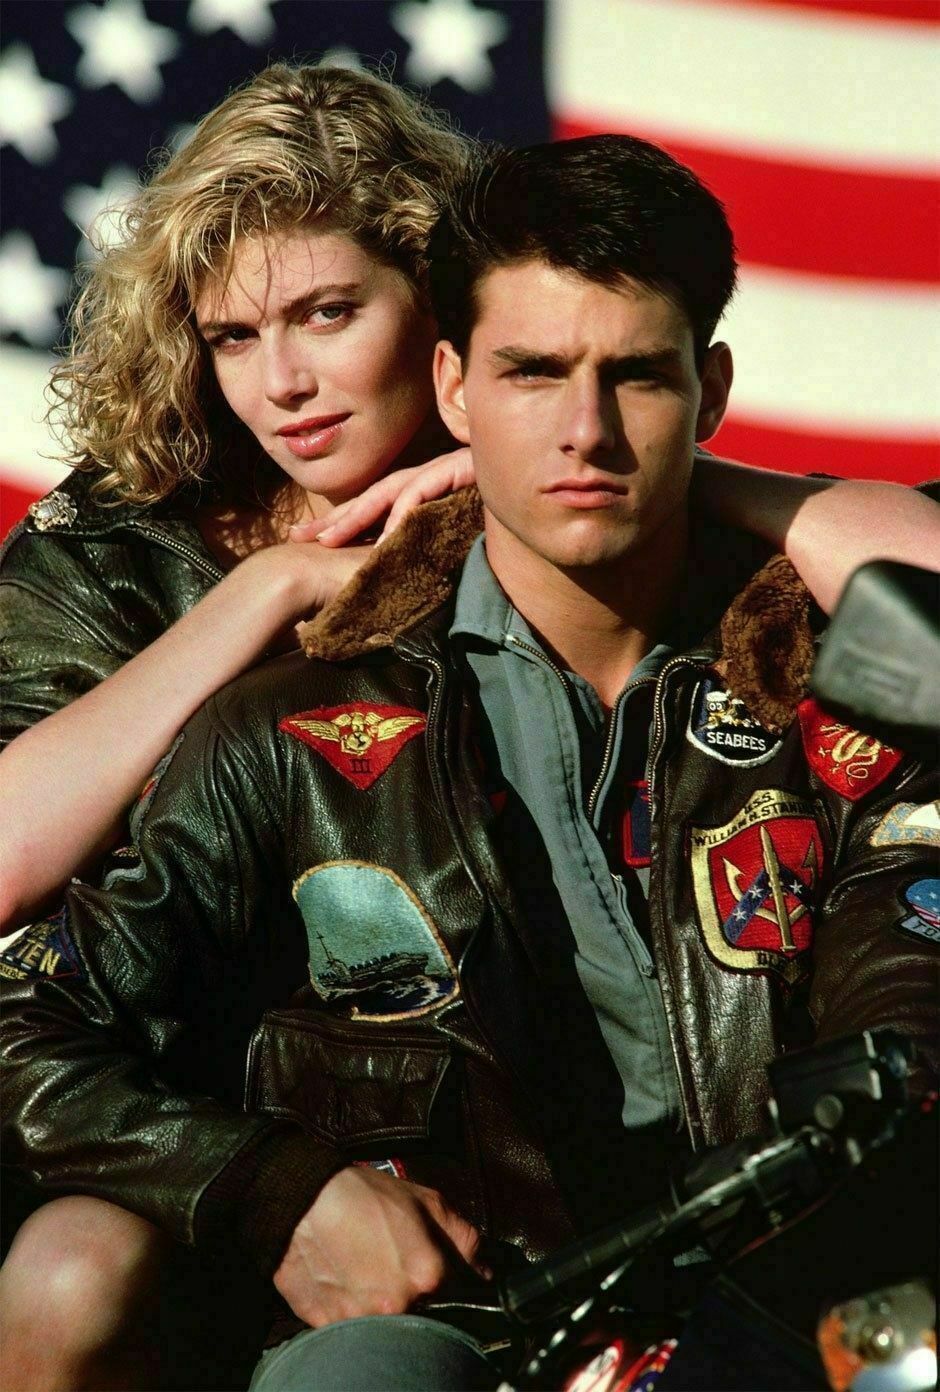 TOP GUN TOM CRUISE A2 (2020) JET PETE MAVERICK FIGHTER BOMBER COW LEATHER JACKET